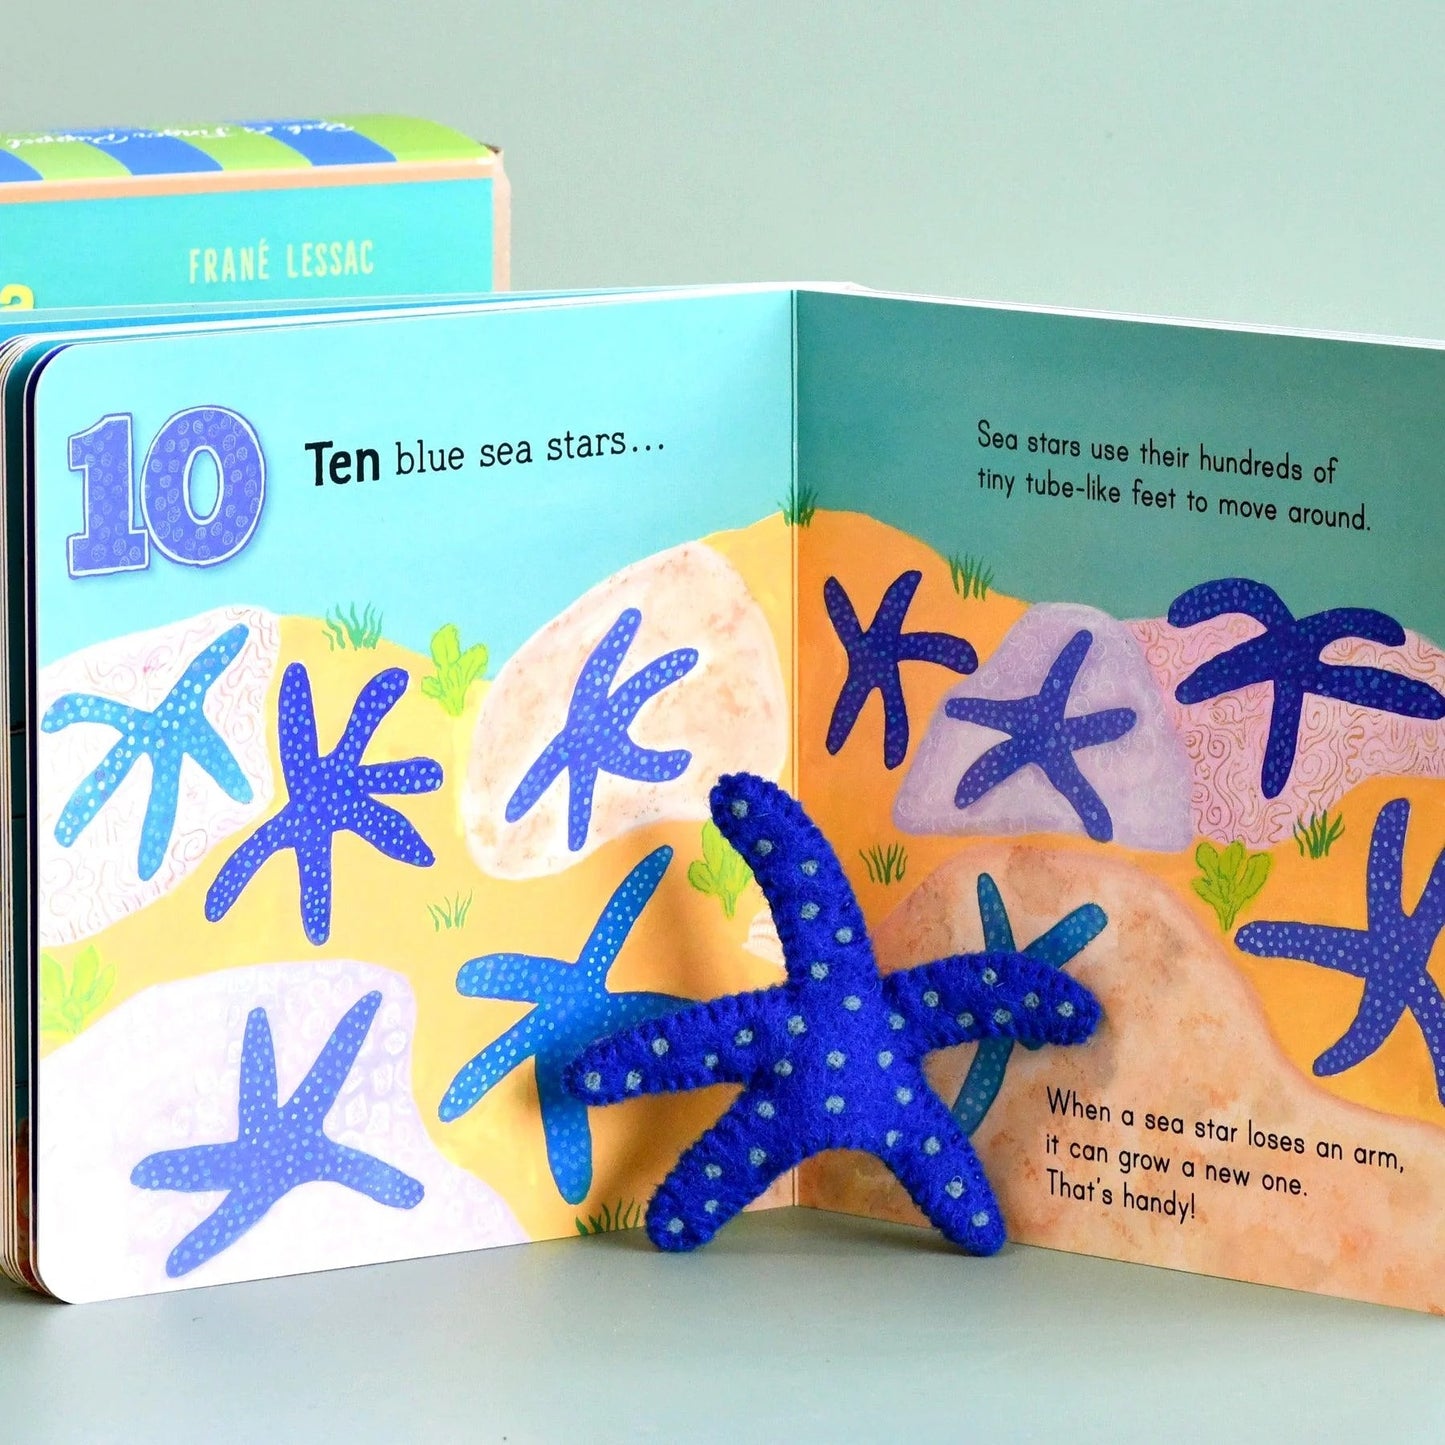 Australia Under the Sea 1,2,3 - Book and Finger Puppet Set